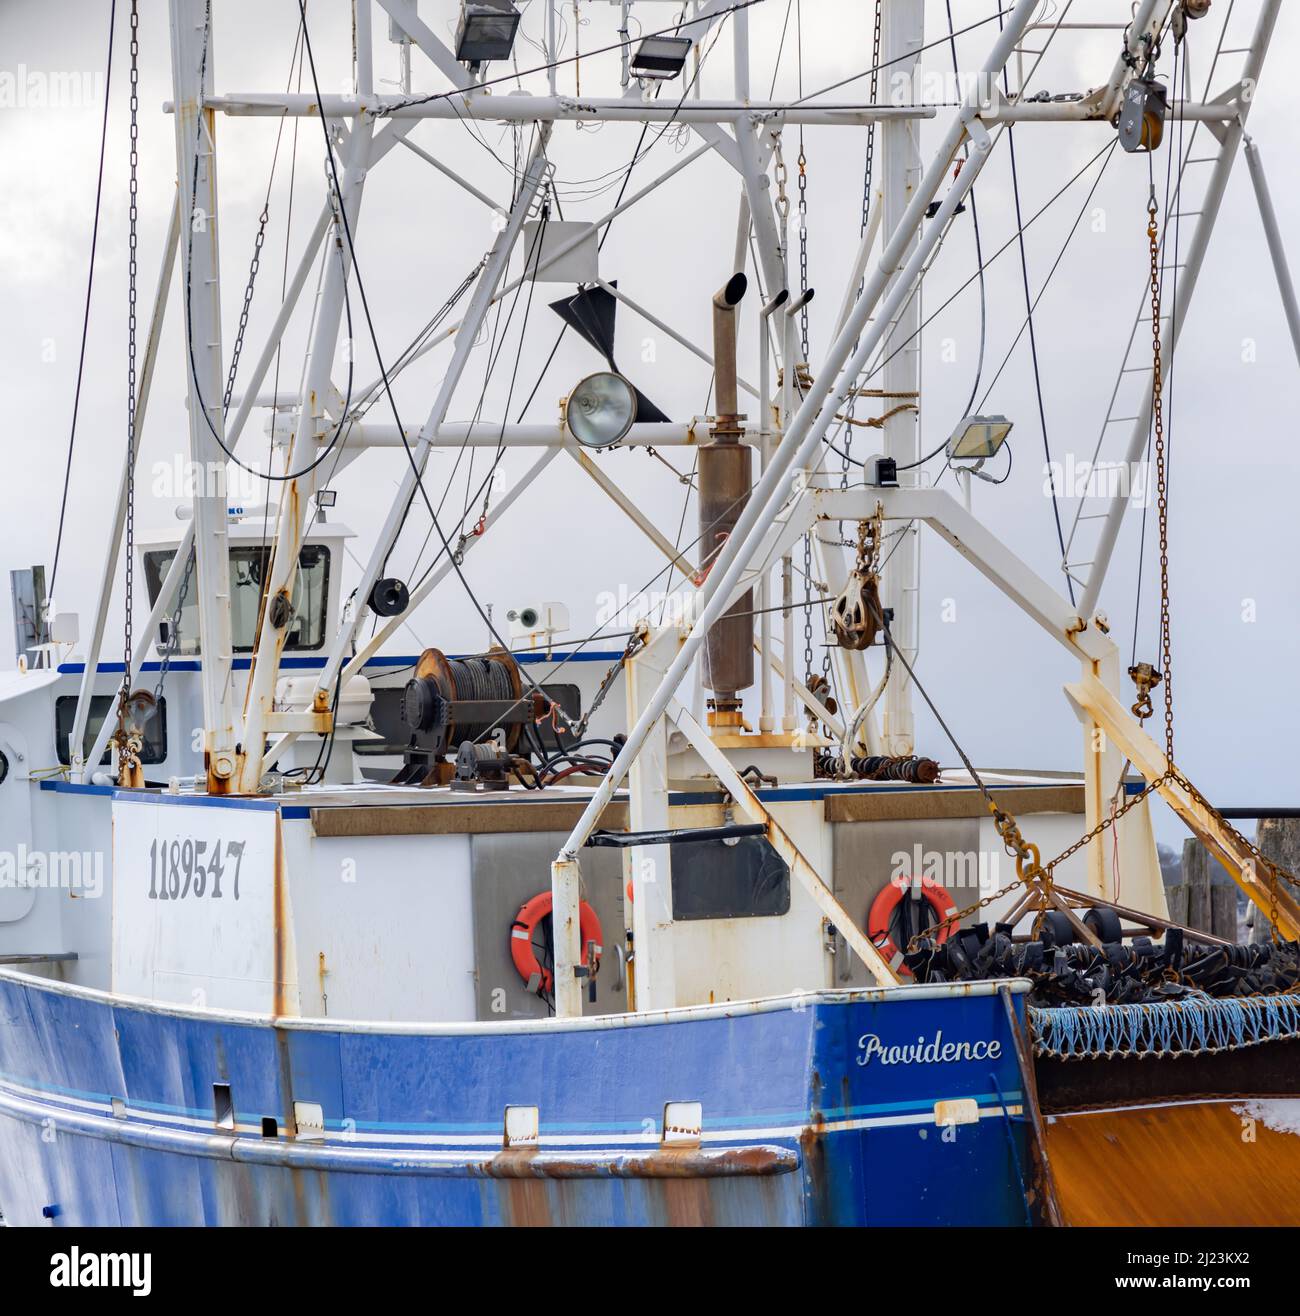 Detail image of a old fishing boat in Greenport, NY Stock Photo